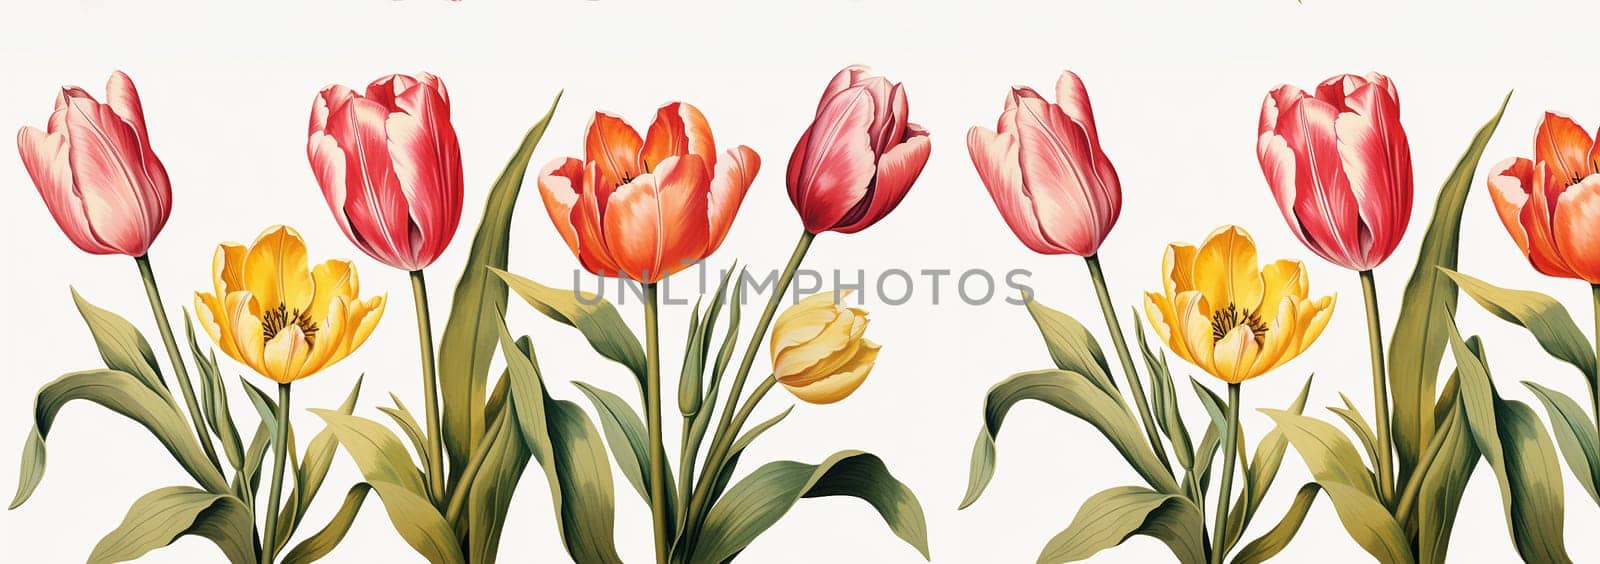 Frame decorated with tulips with copy space. Flower watercolor elements, decorative floral collection for wedding, birthday, Valentine's day card. Pastel colors and hand drawn style. Space for text Spring